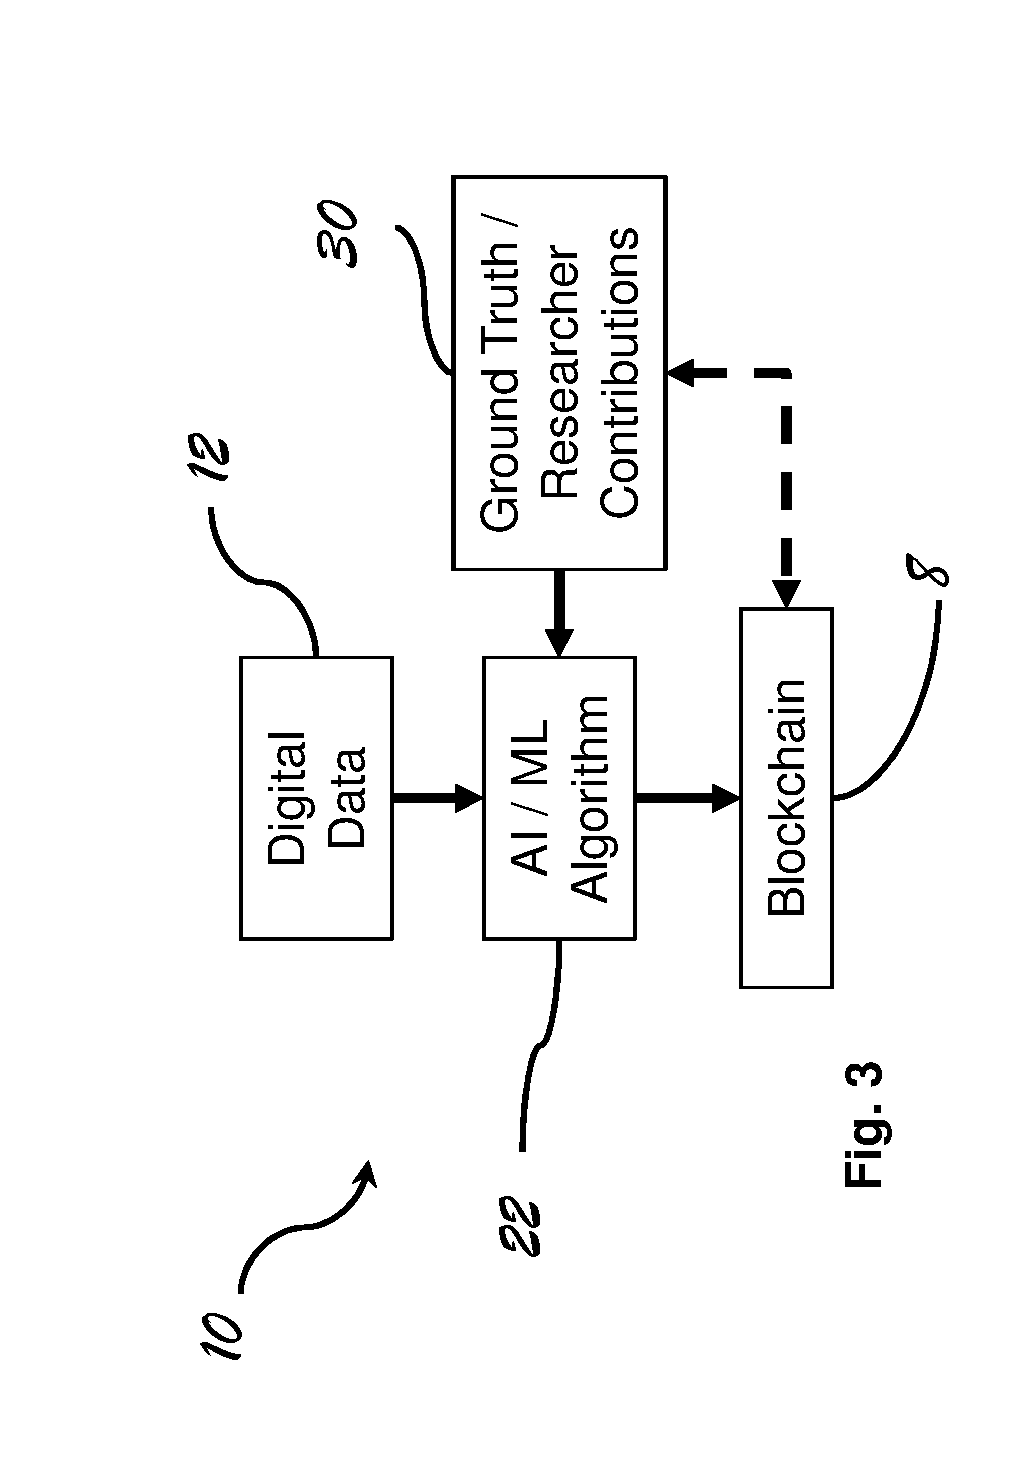 Data aggregation, integration and analysis system and related devices and methods